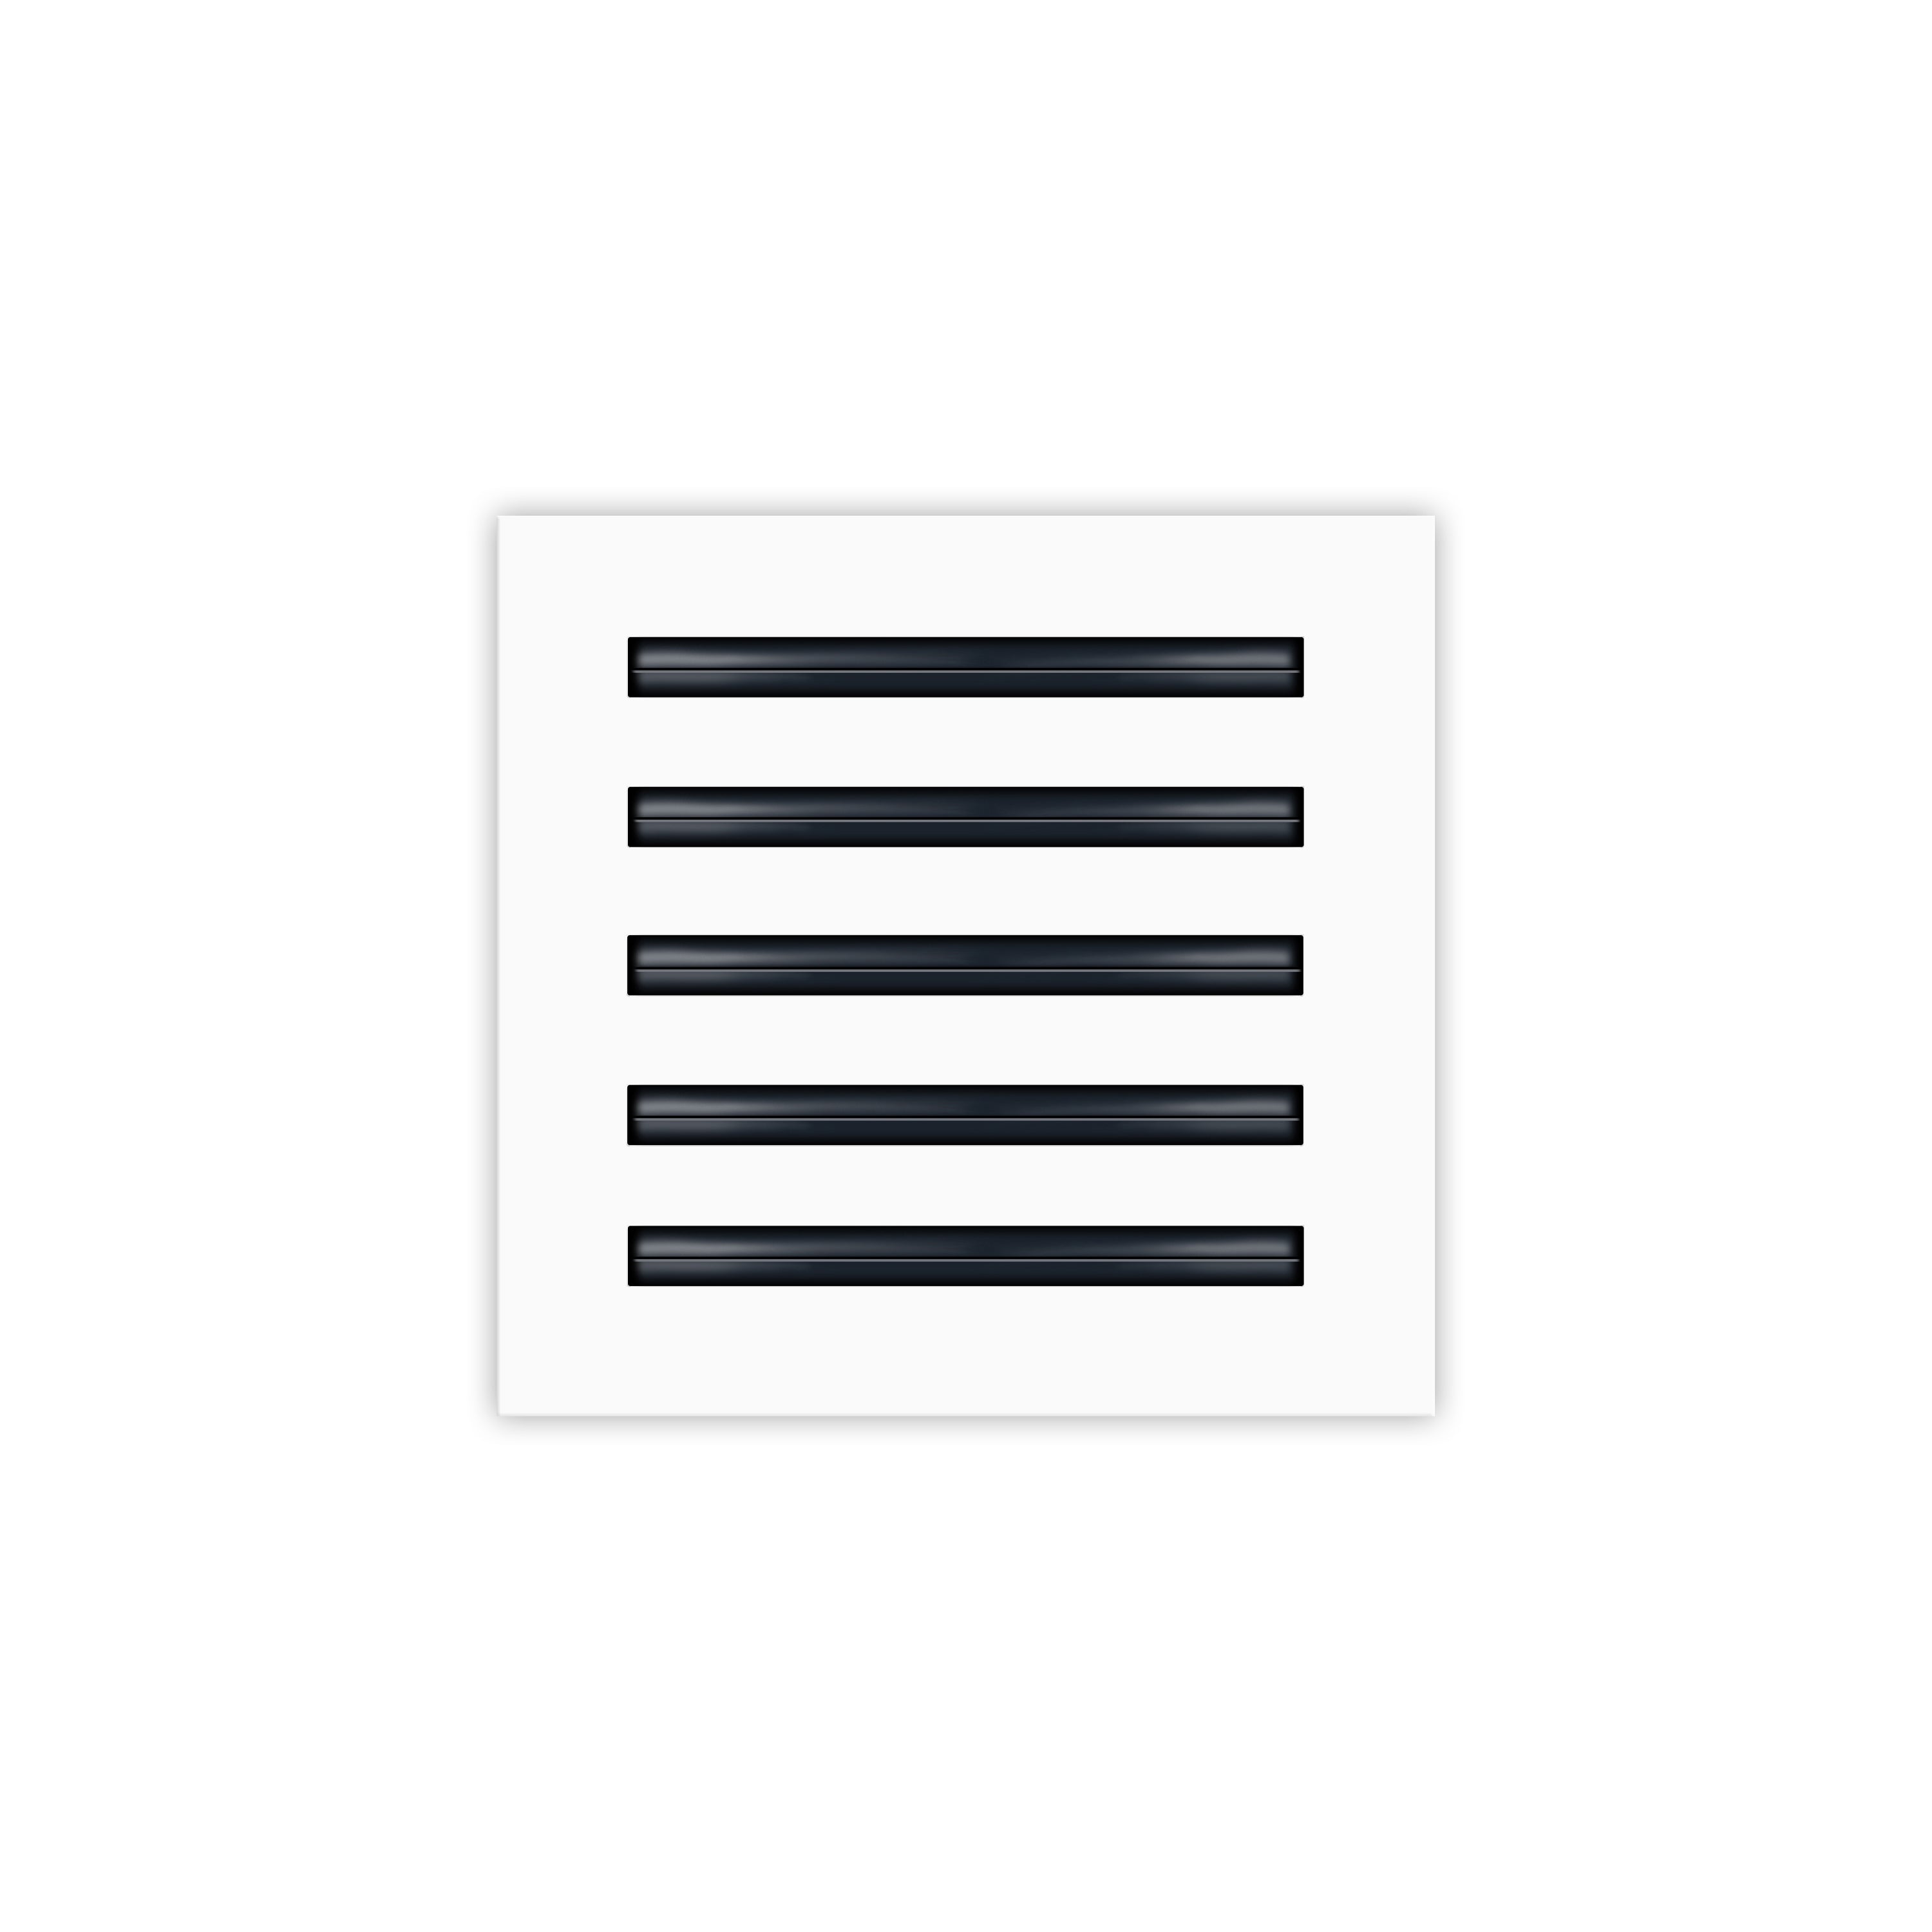 10x10 Modern AC Vent Cover - Decorative White Air Vent - Standard Linear Slot Diffuser - Register Grille for Ceiling, Walls & Floors - Texas Buildmart